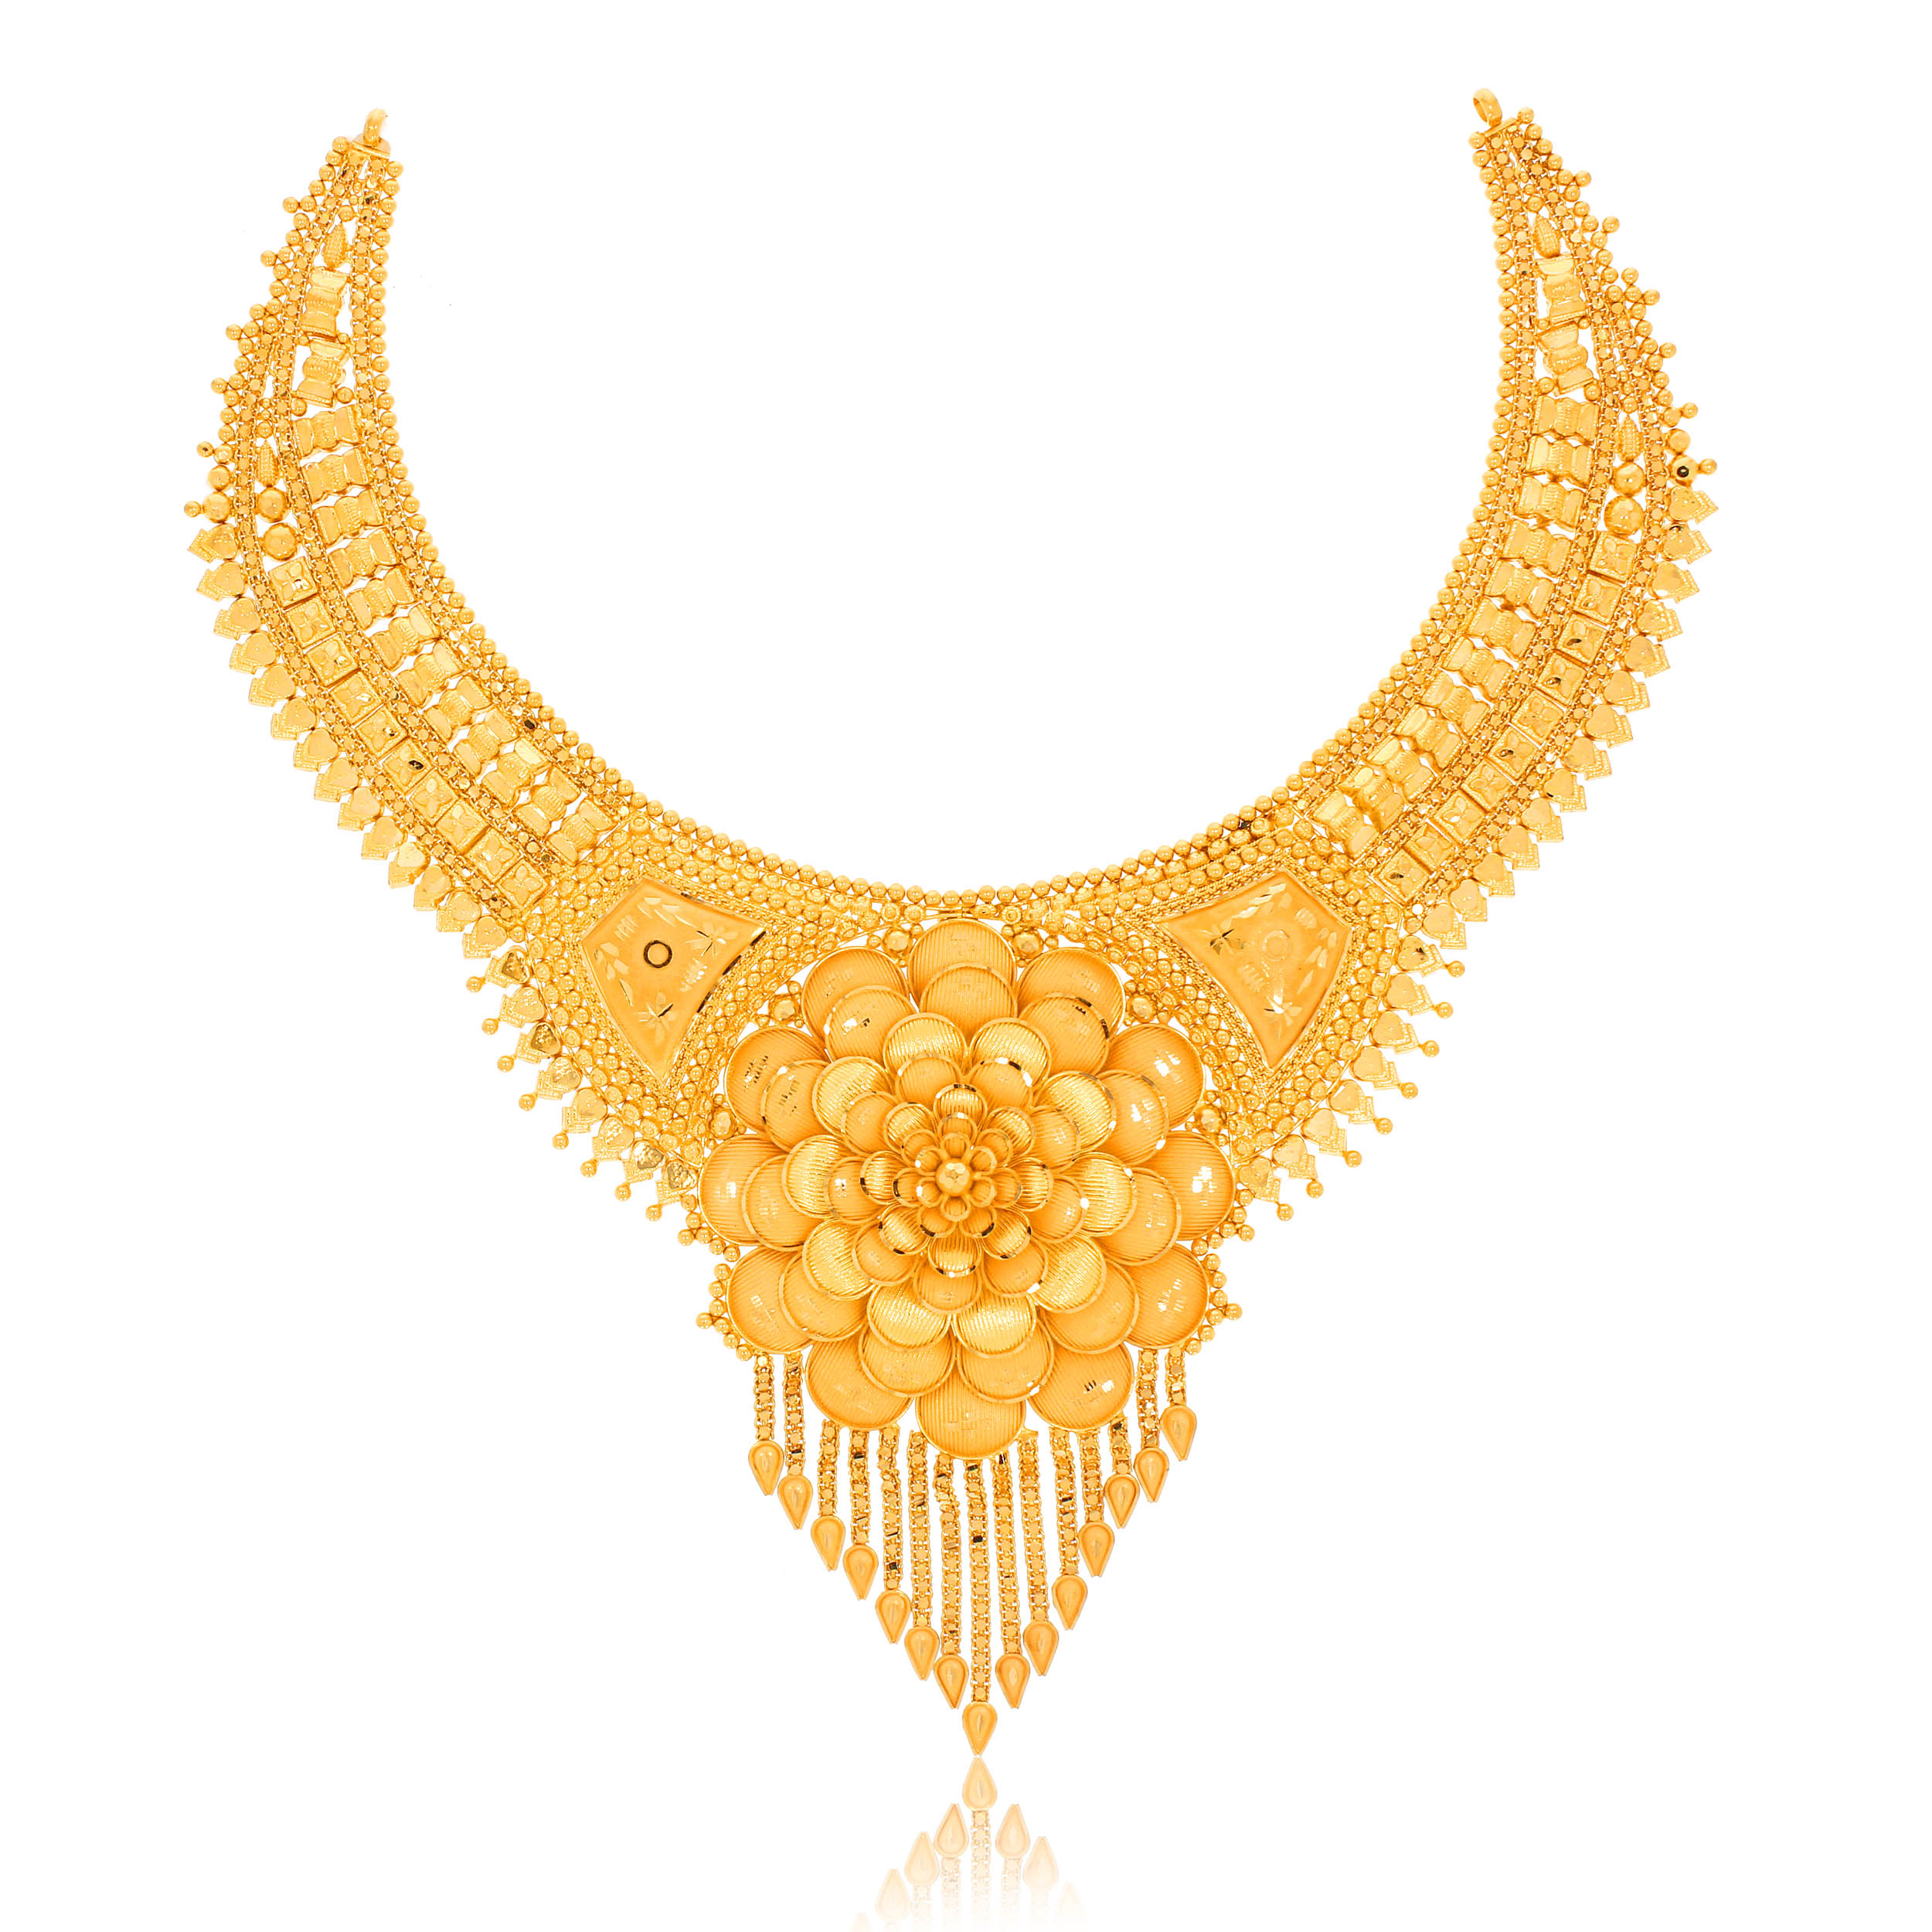 DEV AABI JEWELS 22CT BIS HALLMARK GOLD  NECKLACE FOR WOMAN